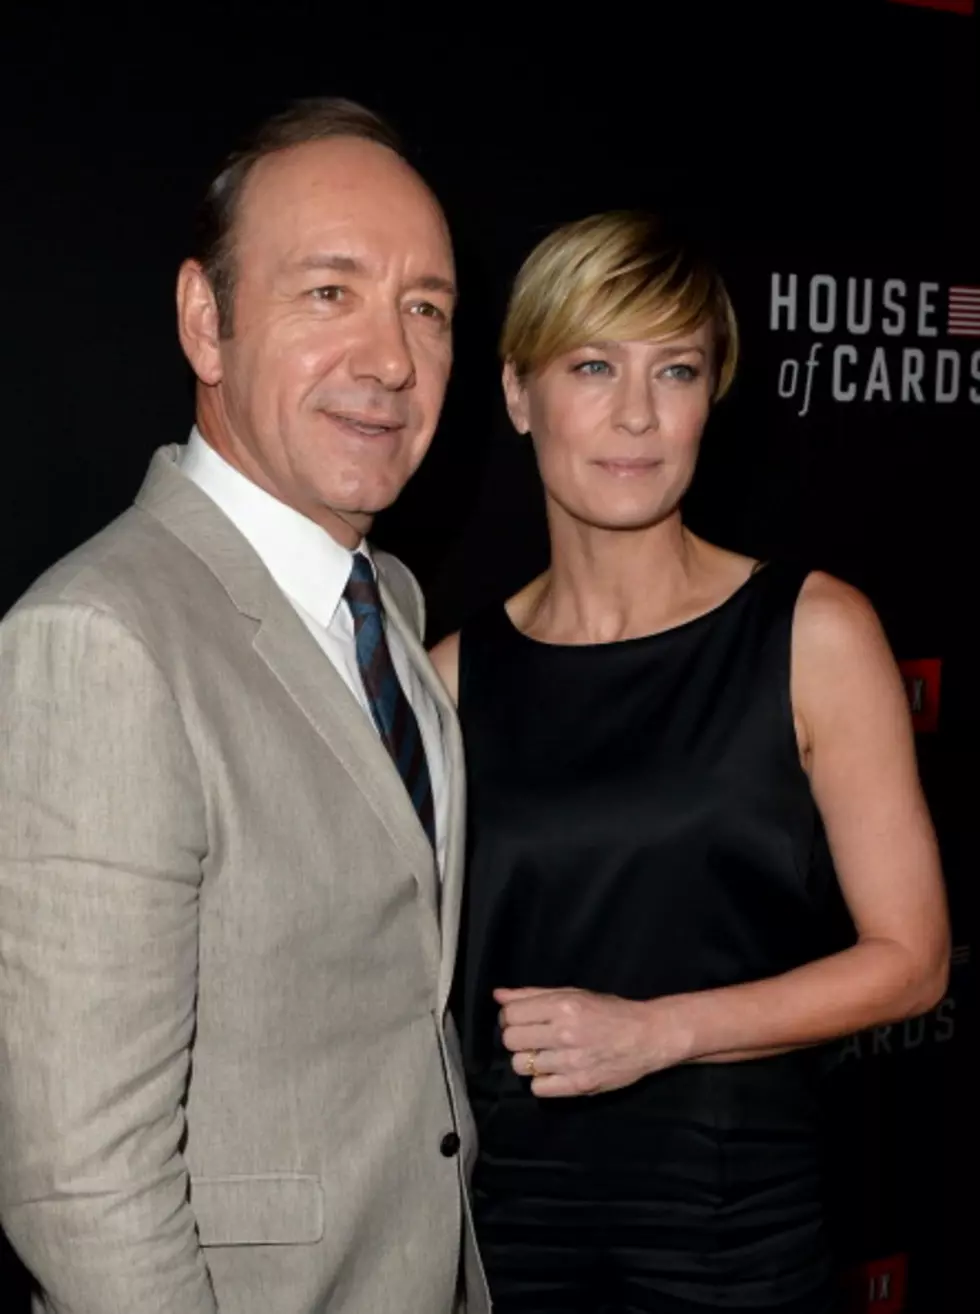 ‘House of Cards’ Means Lots of TV Watching All at Once [Video]